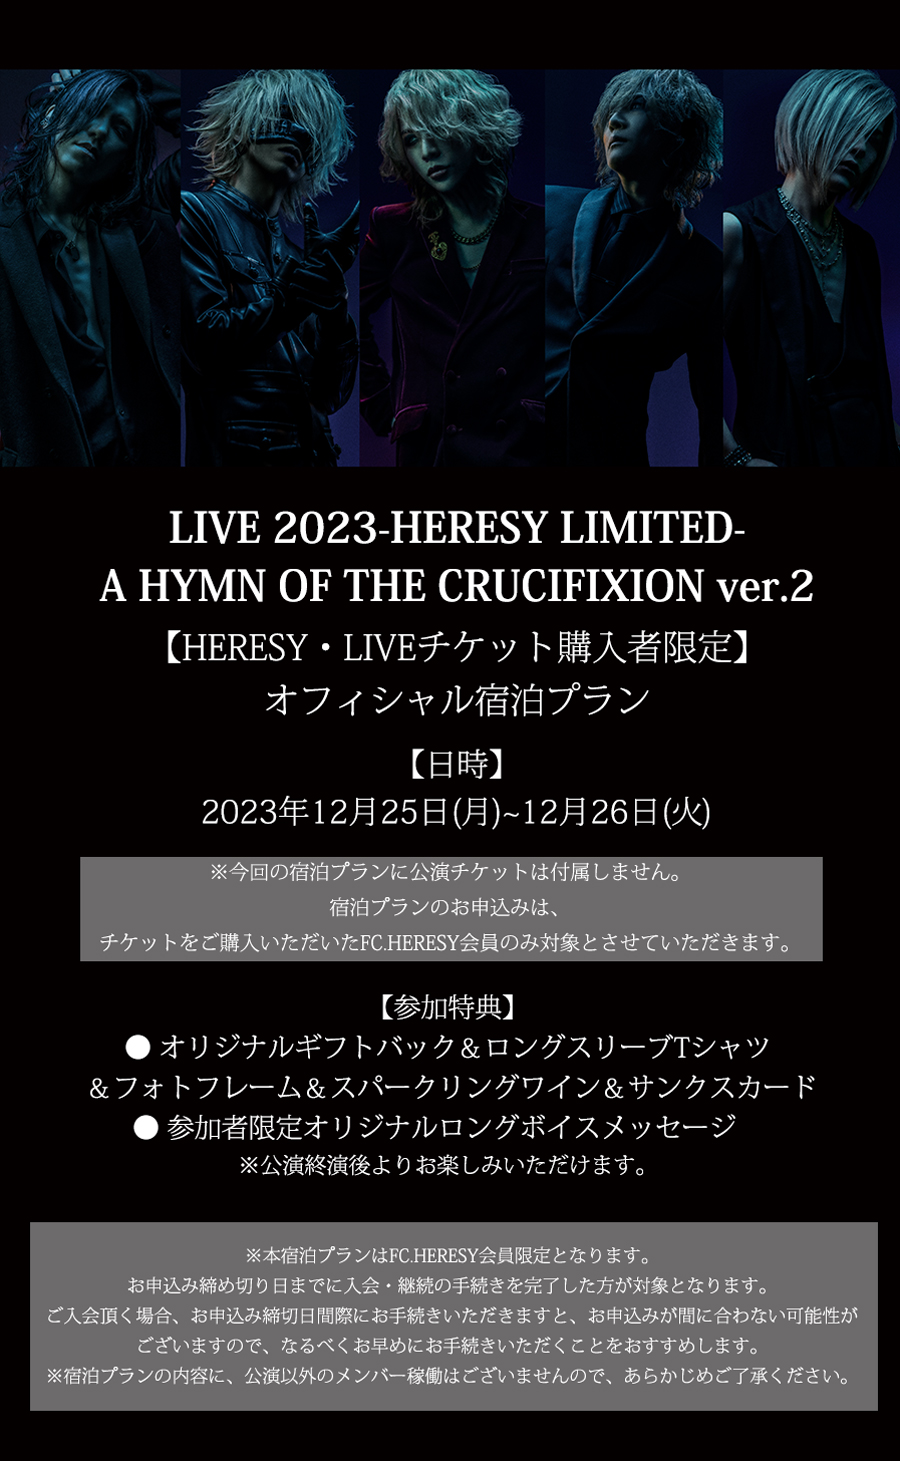 uLIVE 2023-HERESY LIMITED- A HYMN OF THE CRUCIFIXION ver.2v HERESYELIVE`PbgwҌ@hv